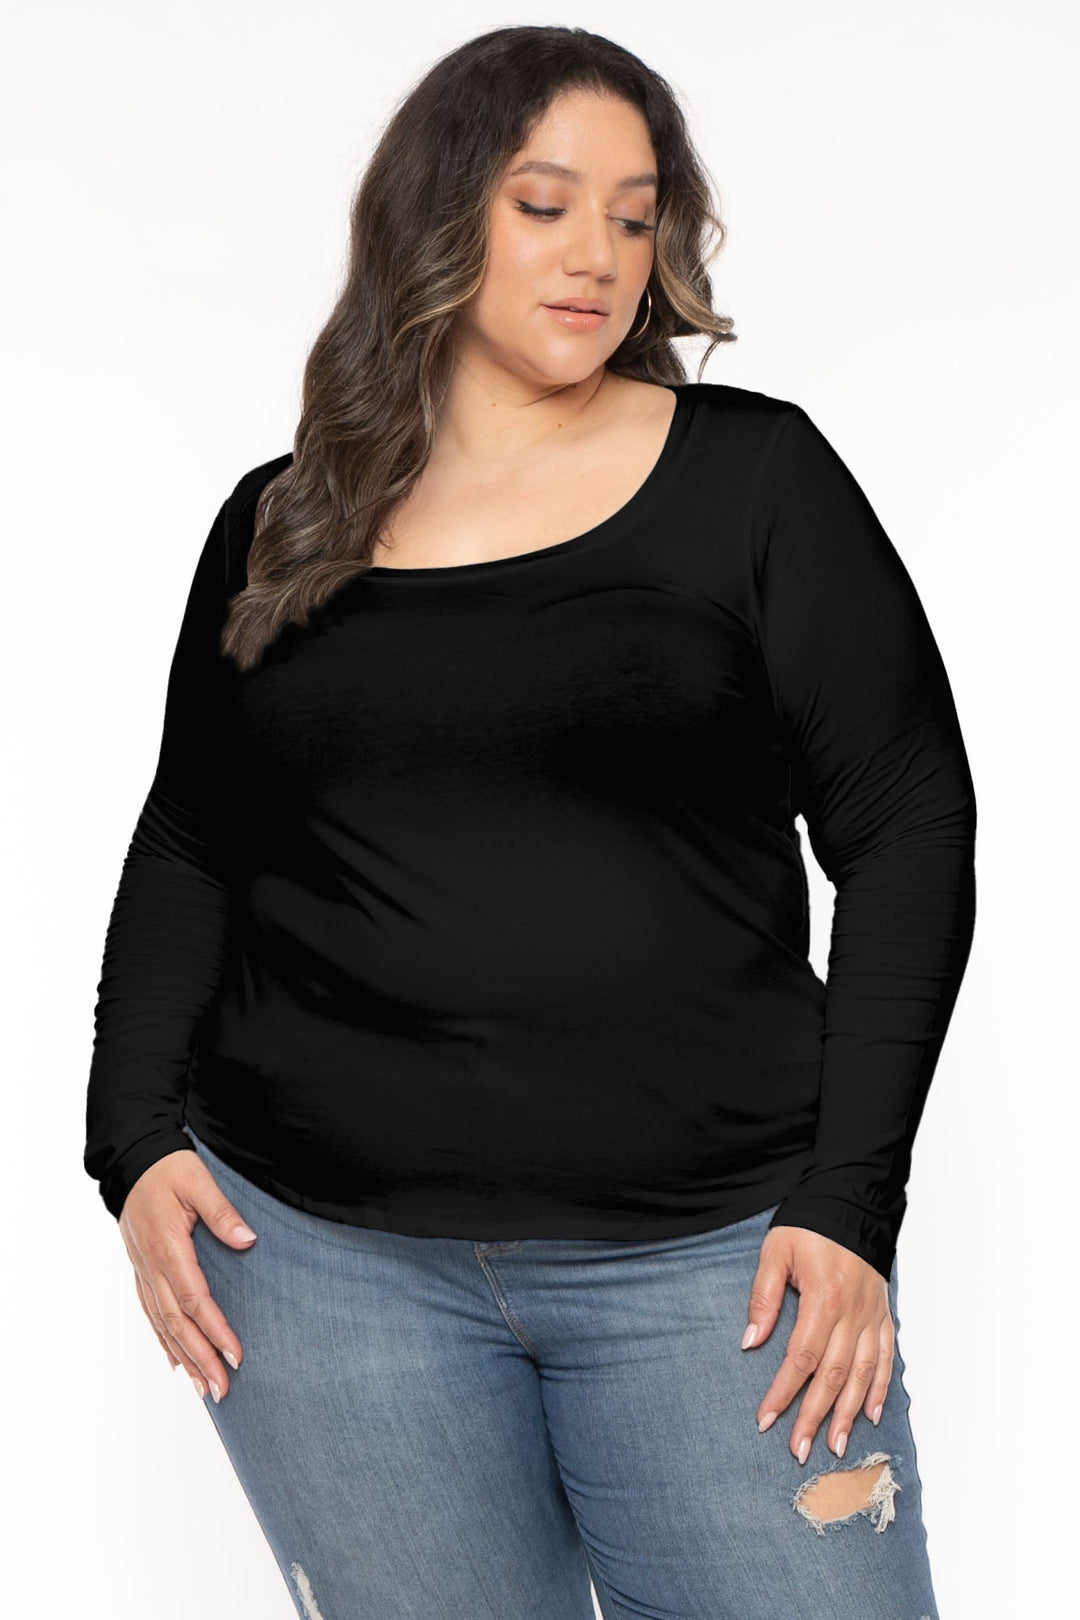 CULTURE CODE Tops Plus Size Aime  Long Sleeve Top - Ivory